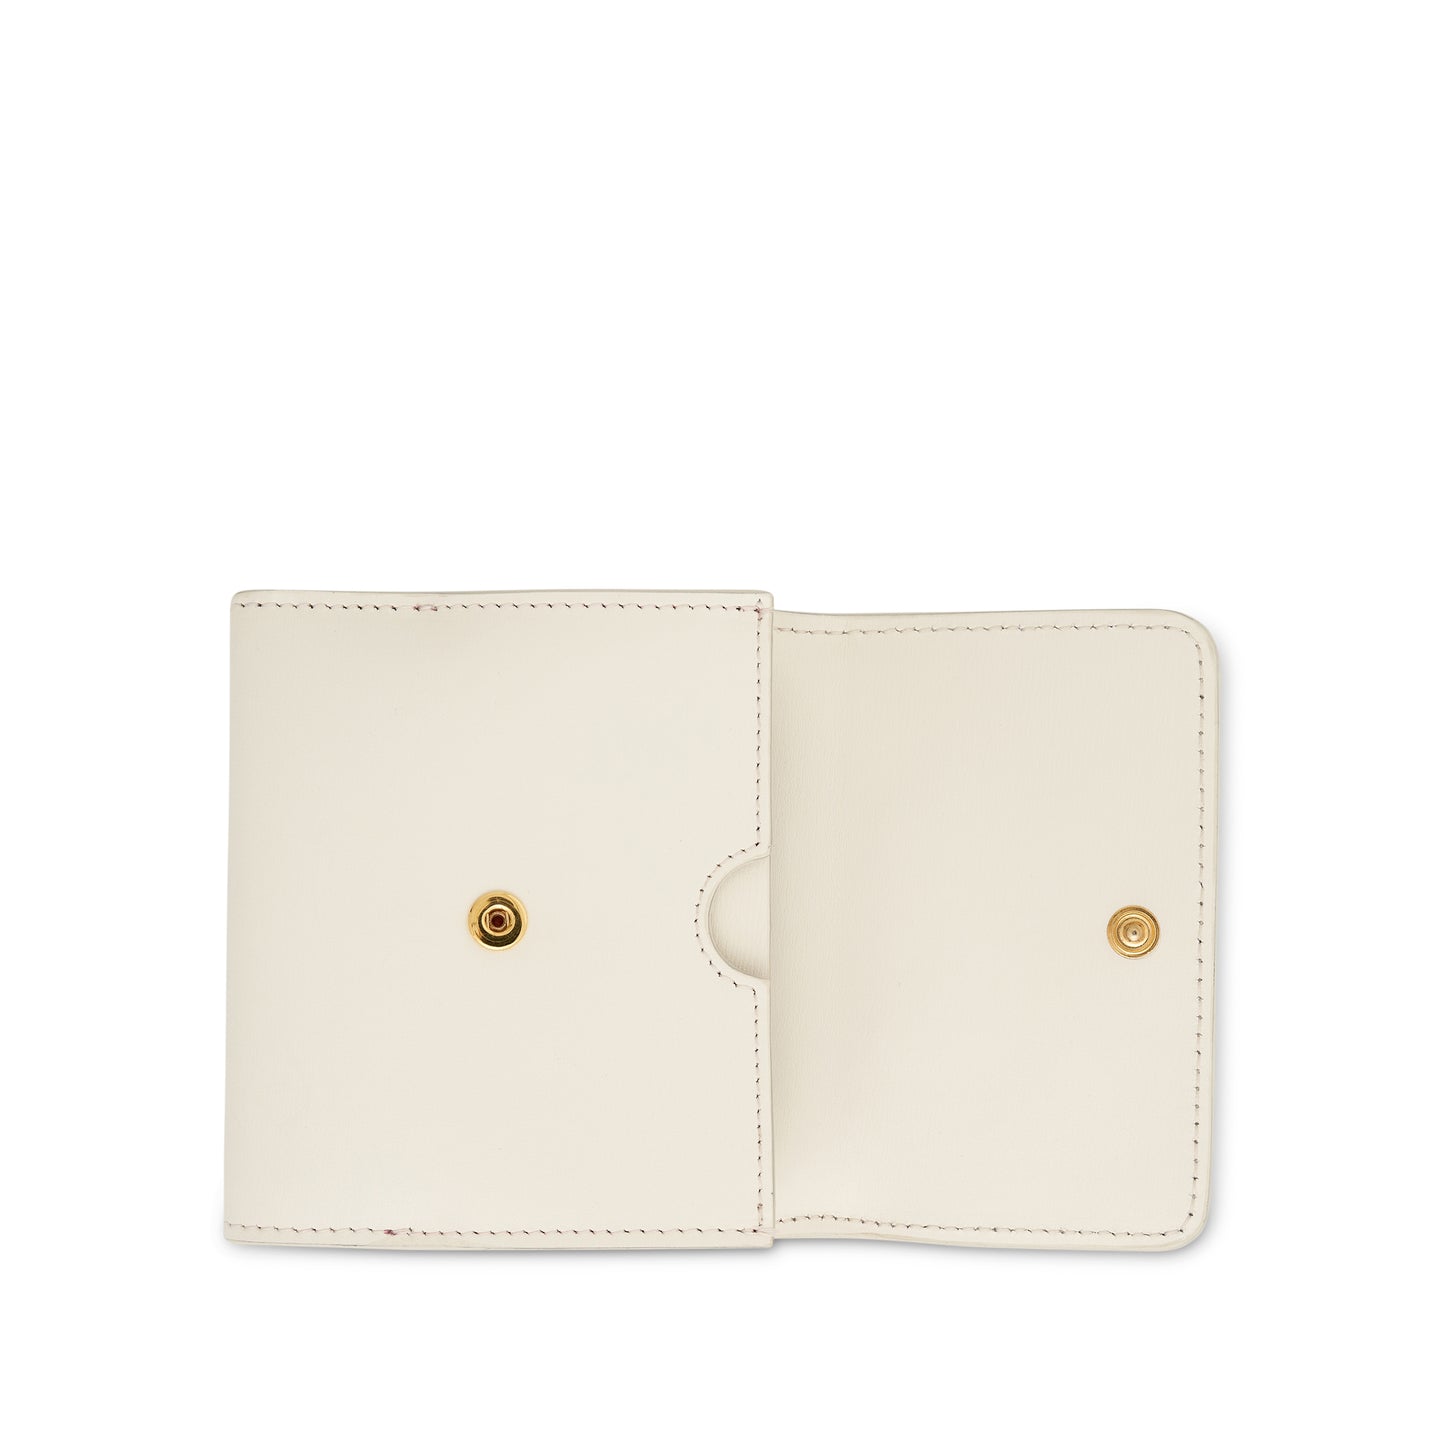 Off-White Jitney French Quote Wallet in White/Black